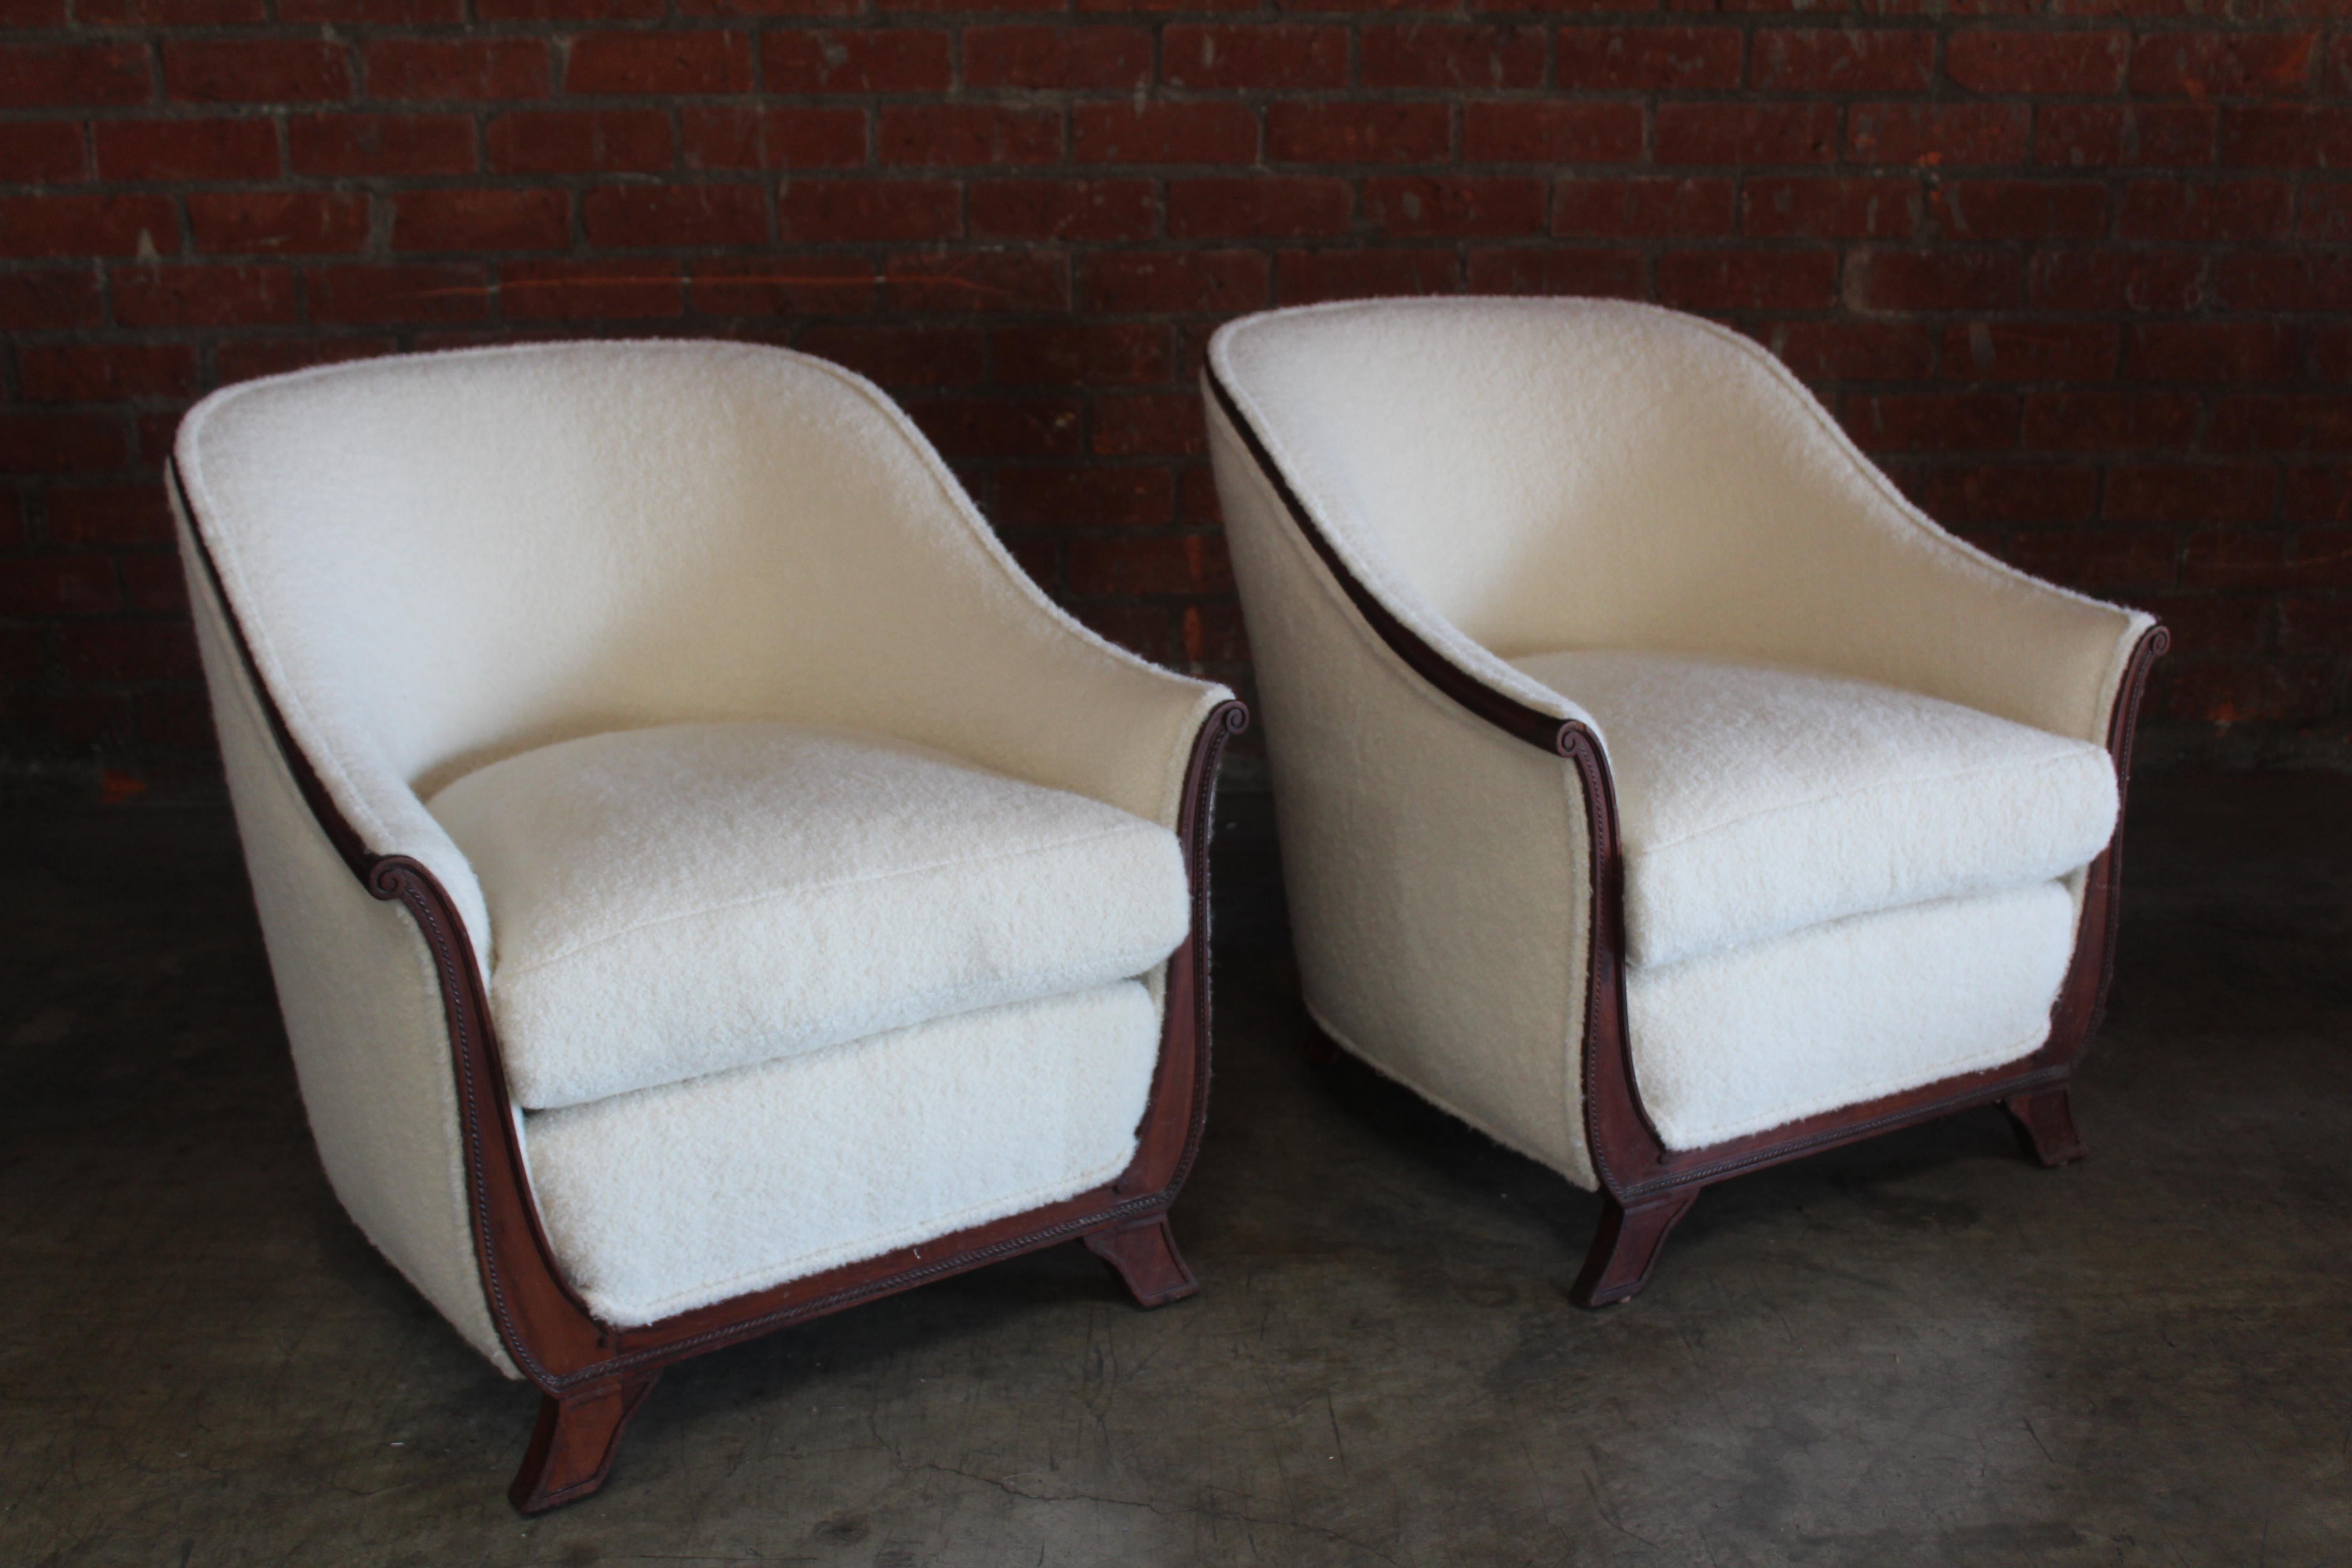 Pair of 1930s lounge chairs from France. They feature mahogany frames with intricate carved details. They have been reupholstered in a new alpaca wool boucle. They are in wonderful condition. The mahogany trim shows minor signs of wear.